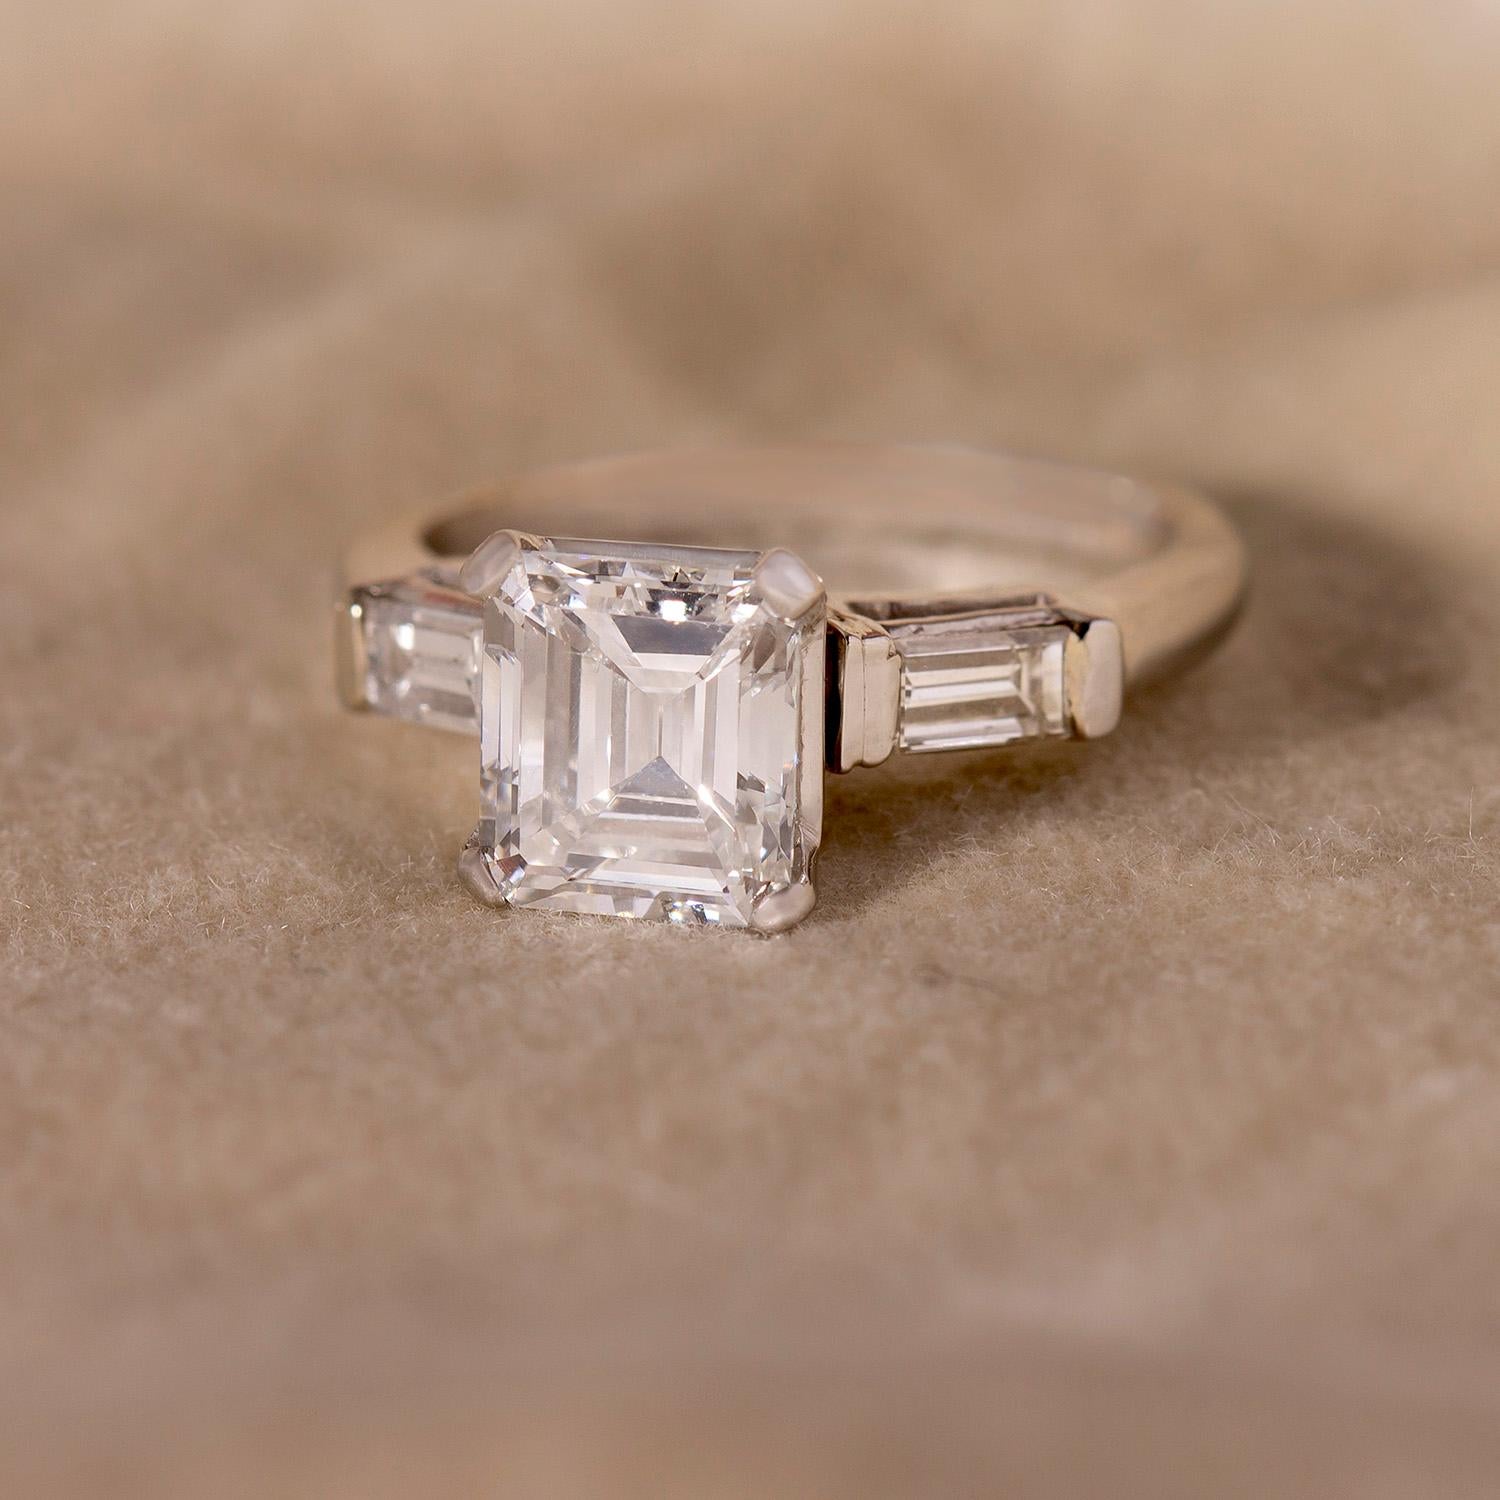 You will get lost in the sharp facets of this sleek mid-century engagement ring. An icy-white emerald-cut center stands bright in the center, flanked by two delicate channel-set baguettes.

Why we love it? This is a classic piece that will never go